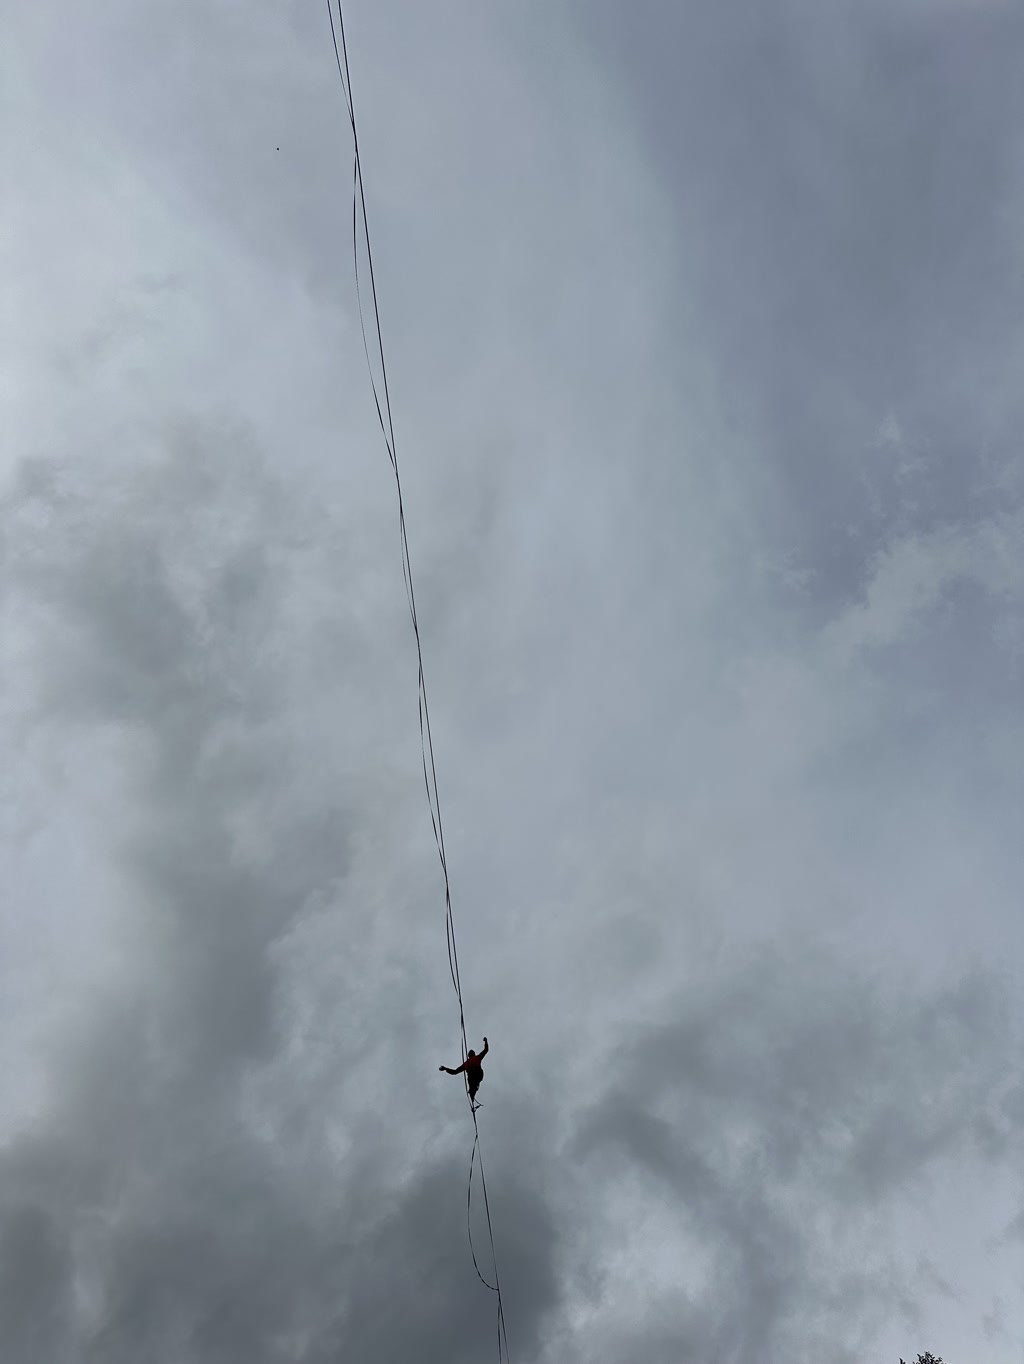 A person is balancing on a slackline that is stretched across a background of a cloudy sky. The slackline appears to be high above the ground and is not supported by any visible structures, suggesting that the person may be highlining, a form of slacklining performed at significant heights. The individual is standing with their arms outstretched to the sides, likely for balance. The sky is mostly overcast with gray and white clouds, signaling a gloomy or overcast weather.